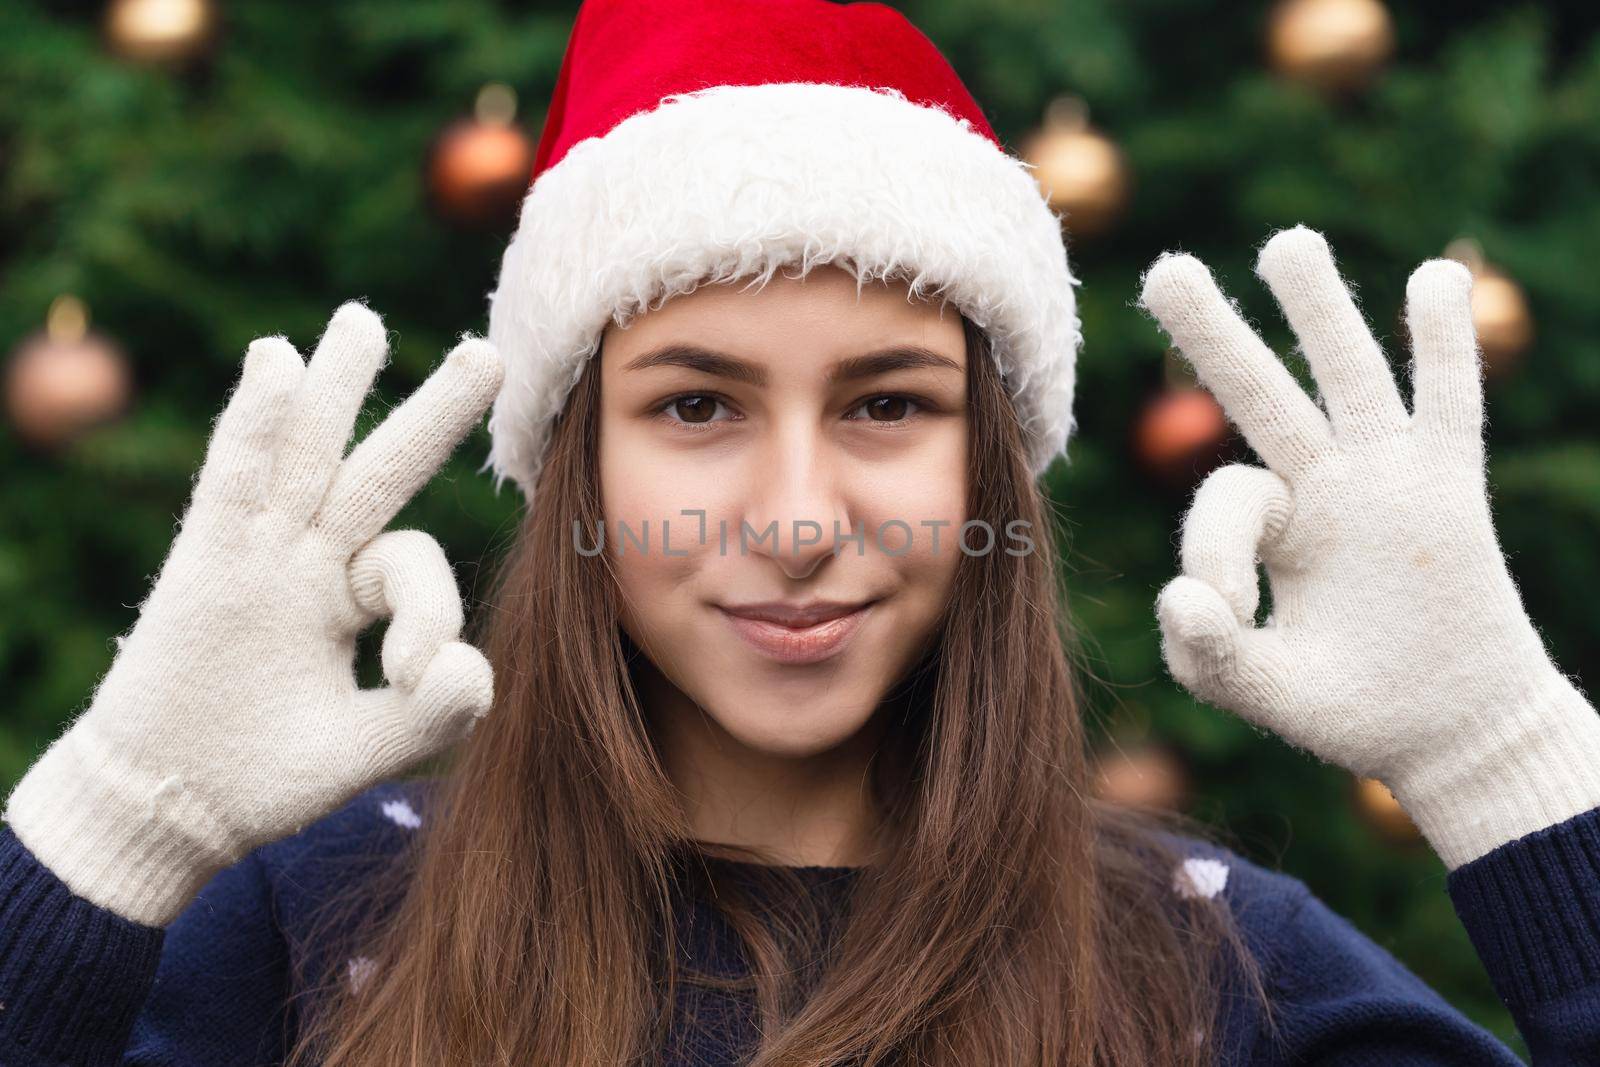 Everything will be fine for christmas. Close up Portrait of woman wearing a santa claus hat with emotion. Against the background of a Christmas tree.